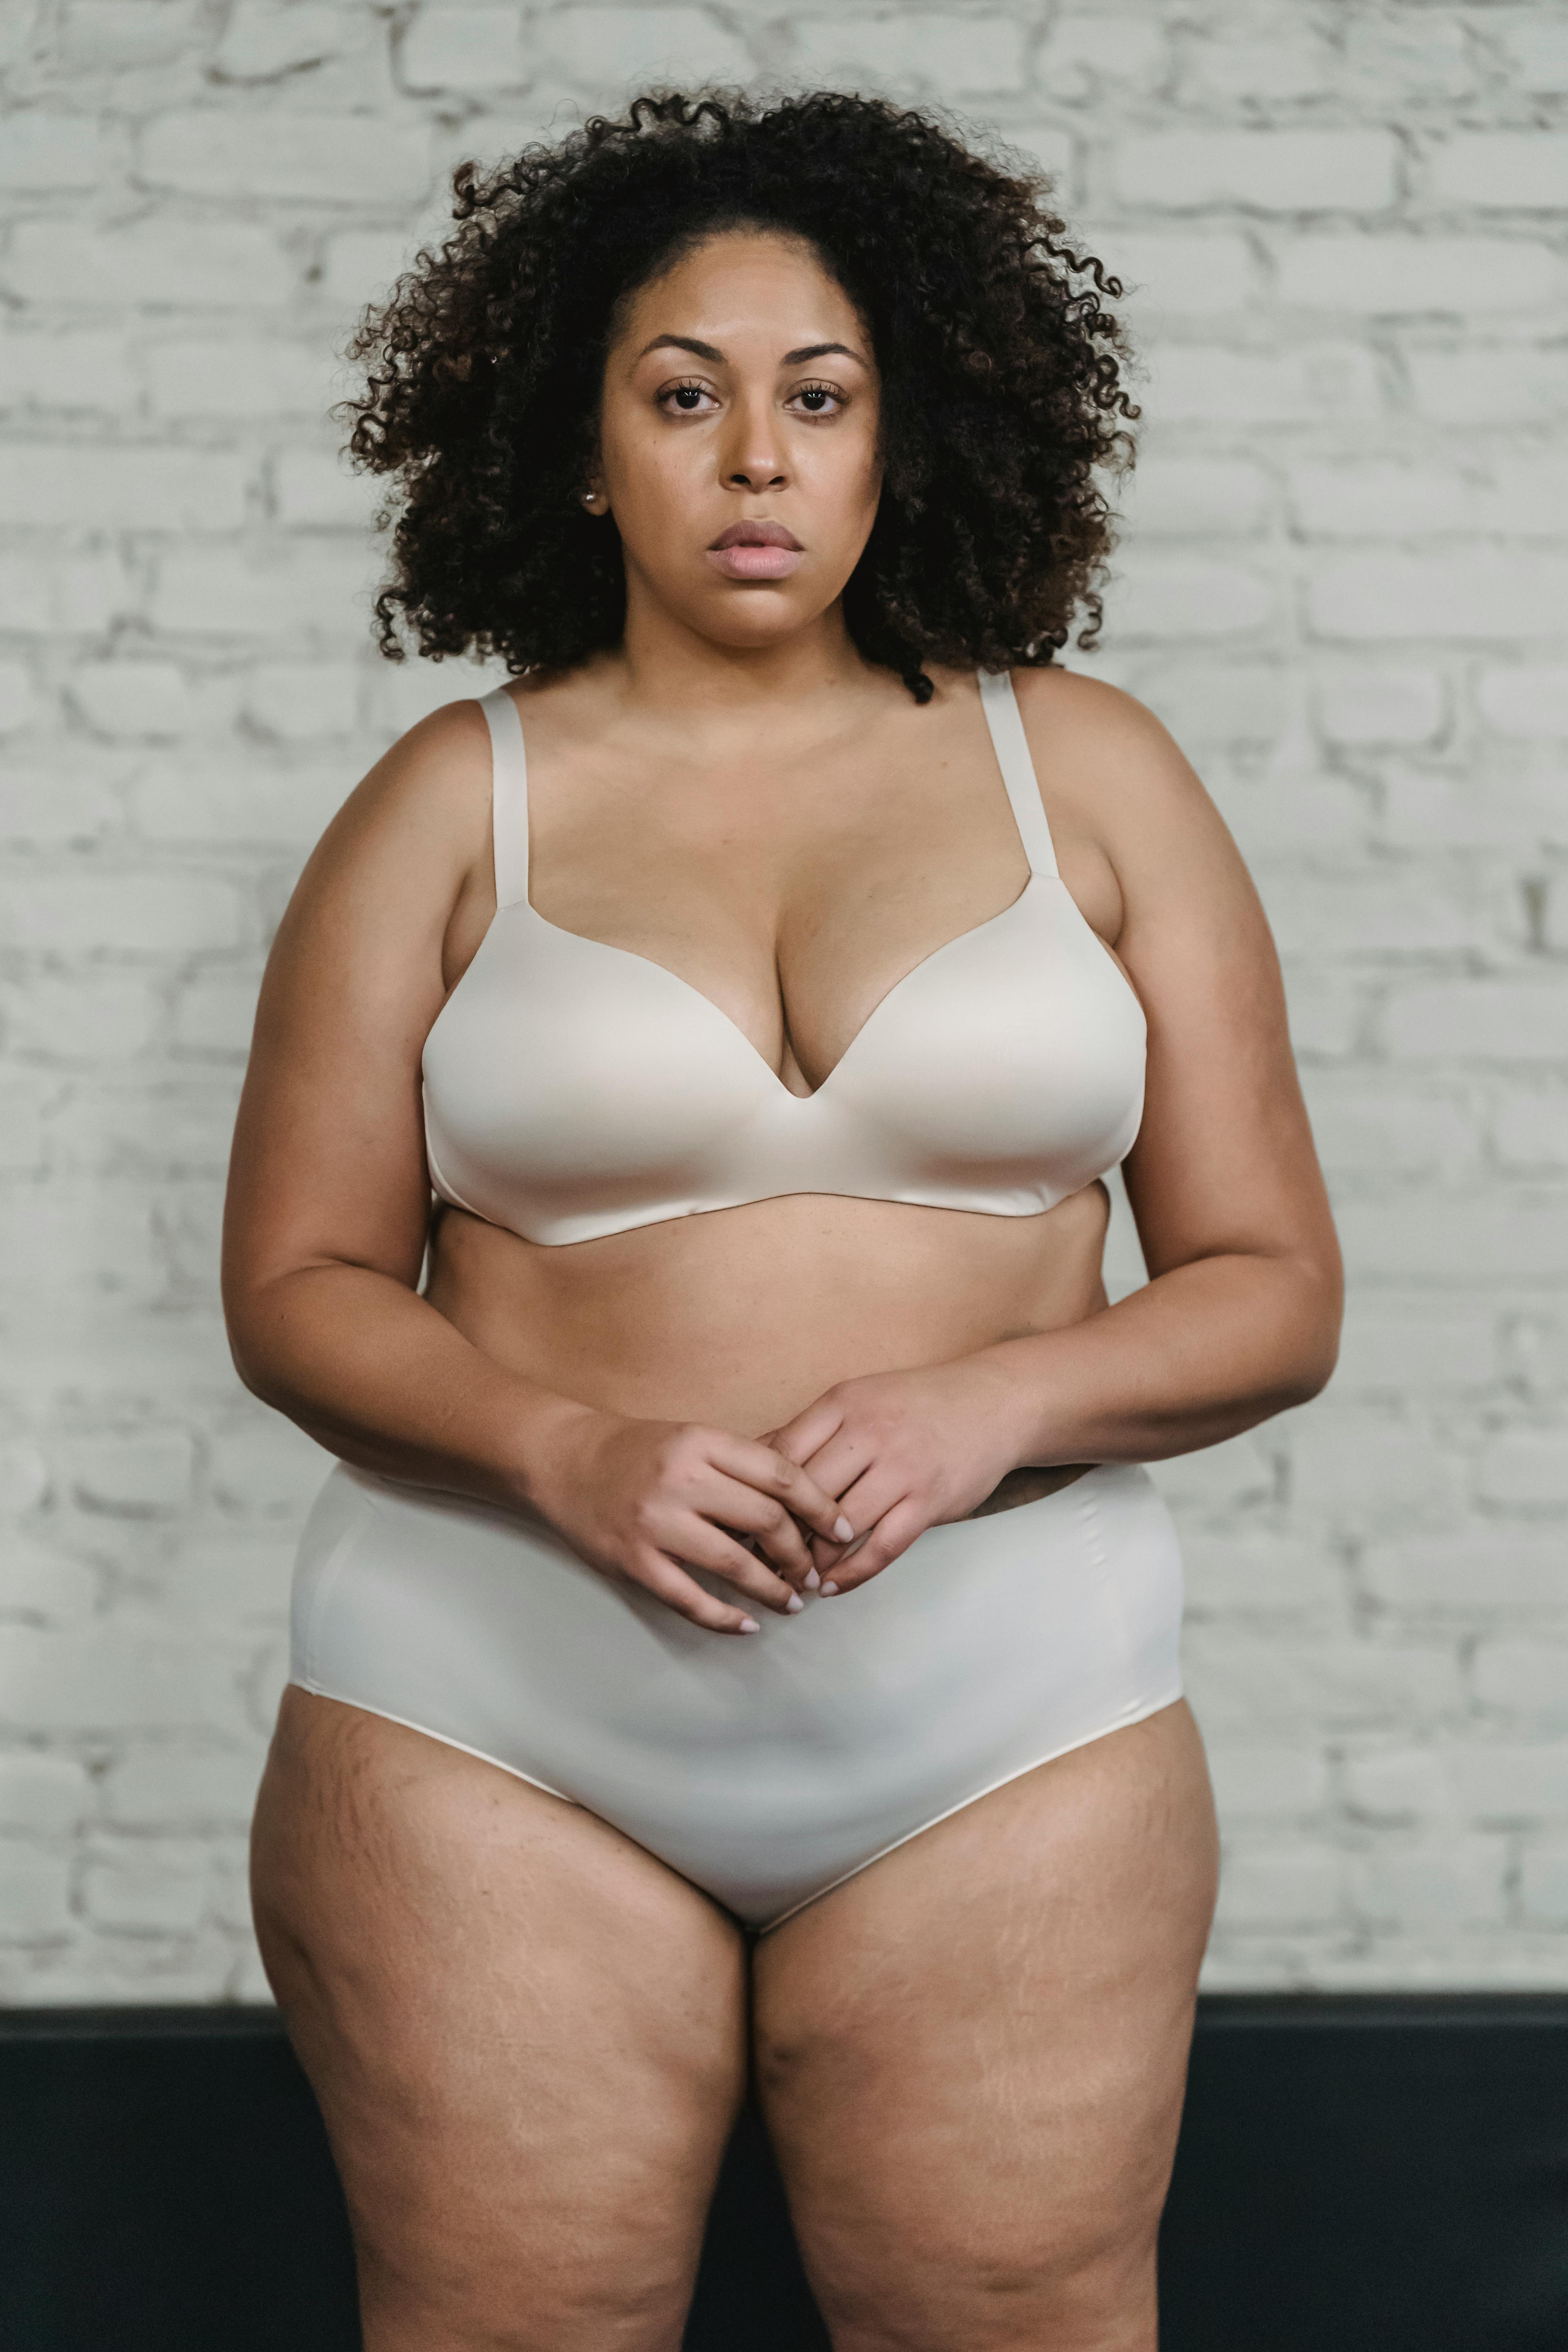 Serious plump black woman in underwear · Free Stock Photo picture